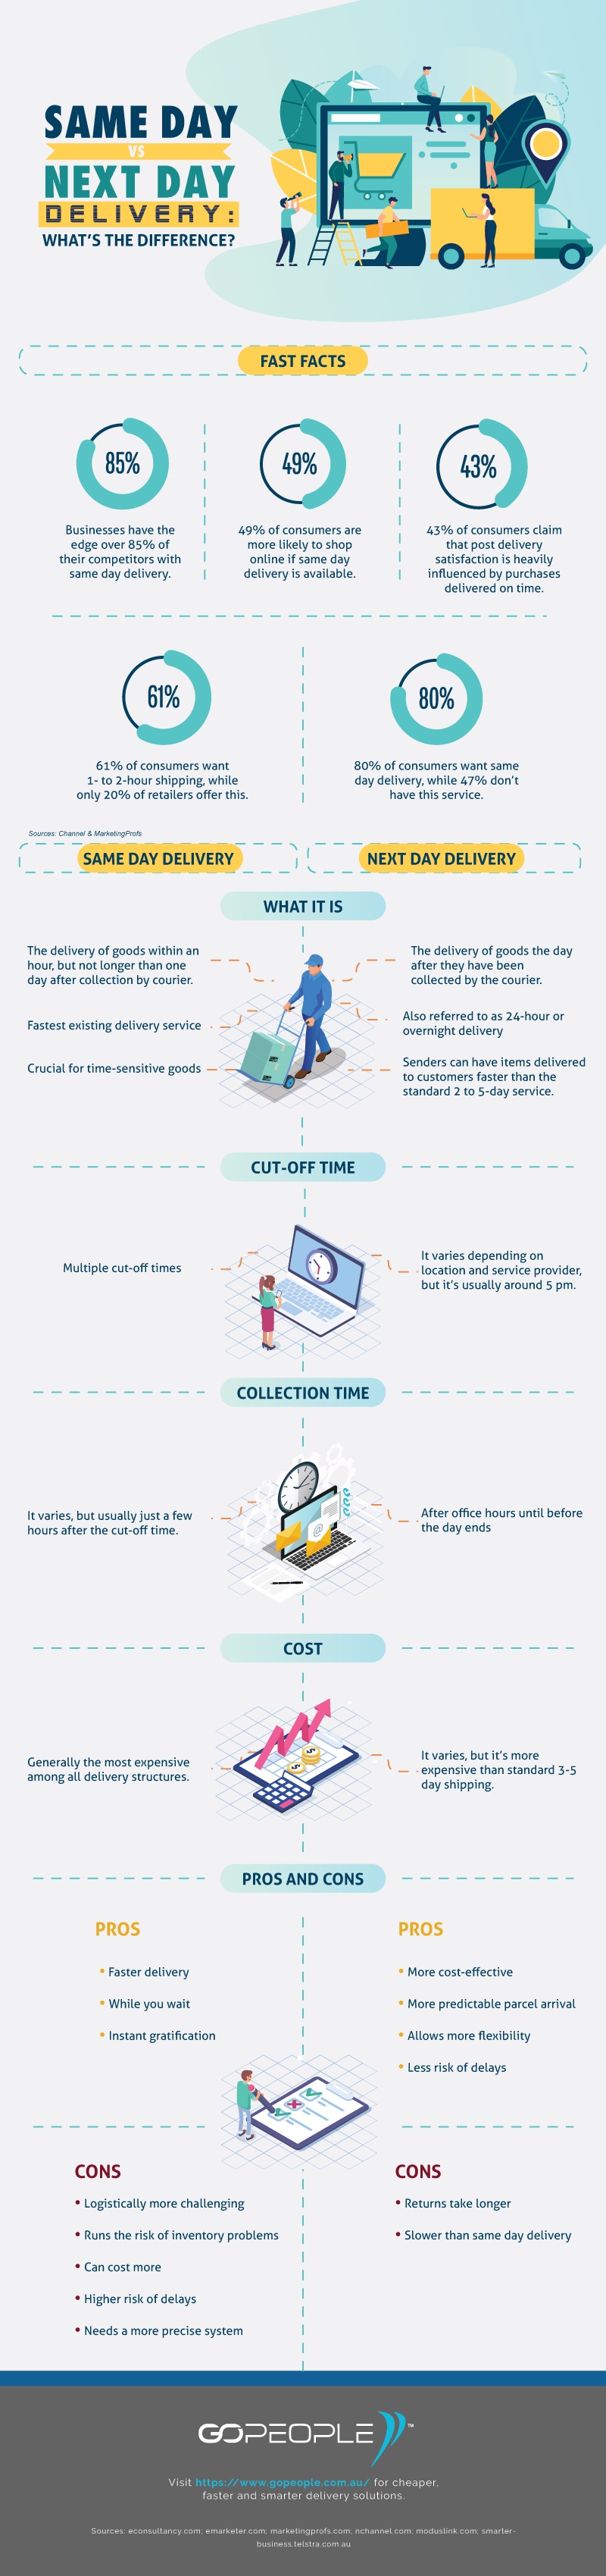 Same Day Delivery vs Next Day: What’s the Difference? Infographic